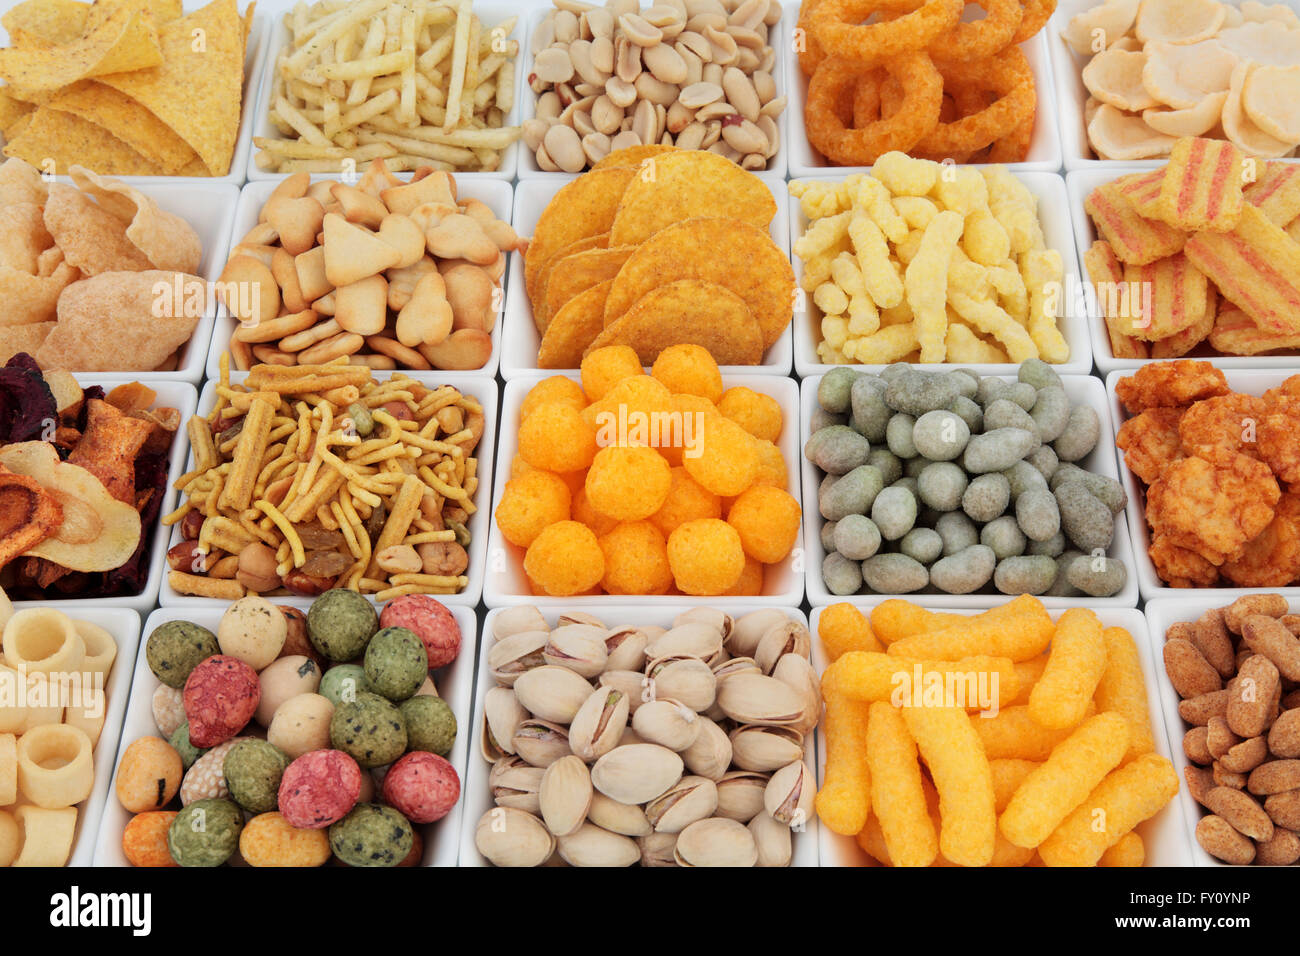 Large savoury snack food selection in square porcelain bowls. Stock Photo